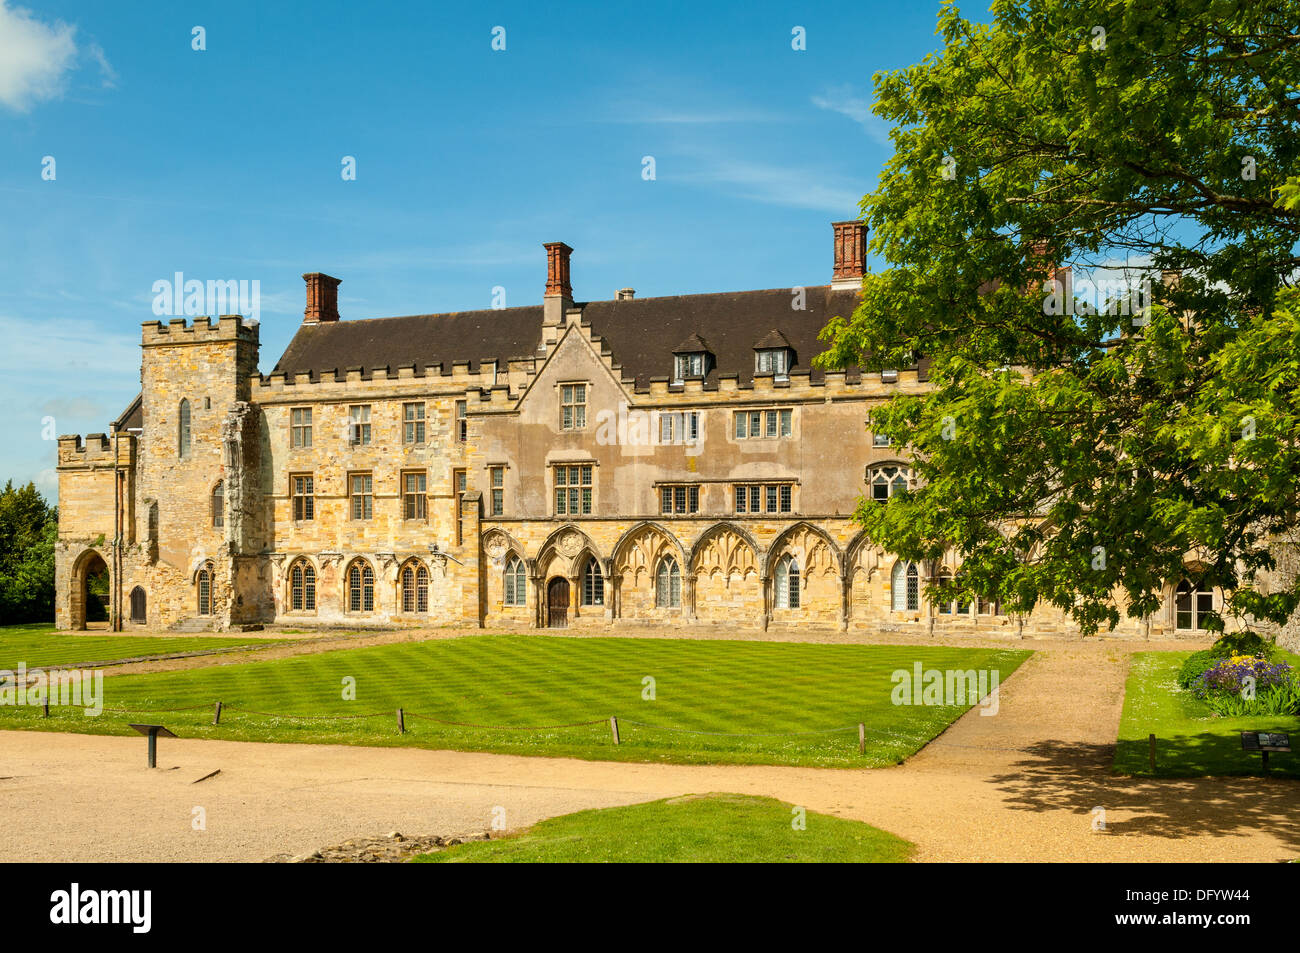 The Great Hall, Battle Abbey, Battle, East Sussex, England Stock Photo